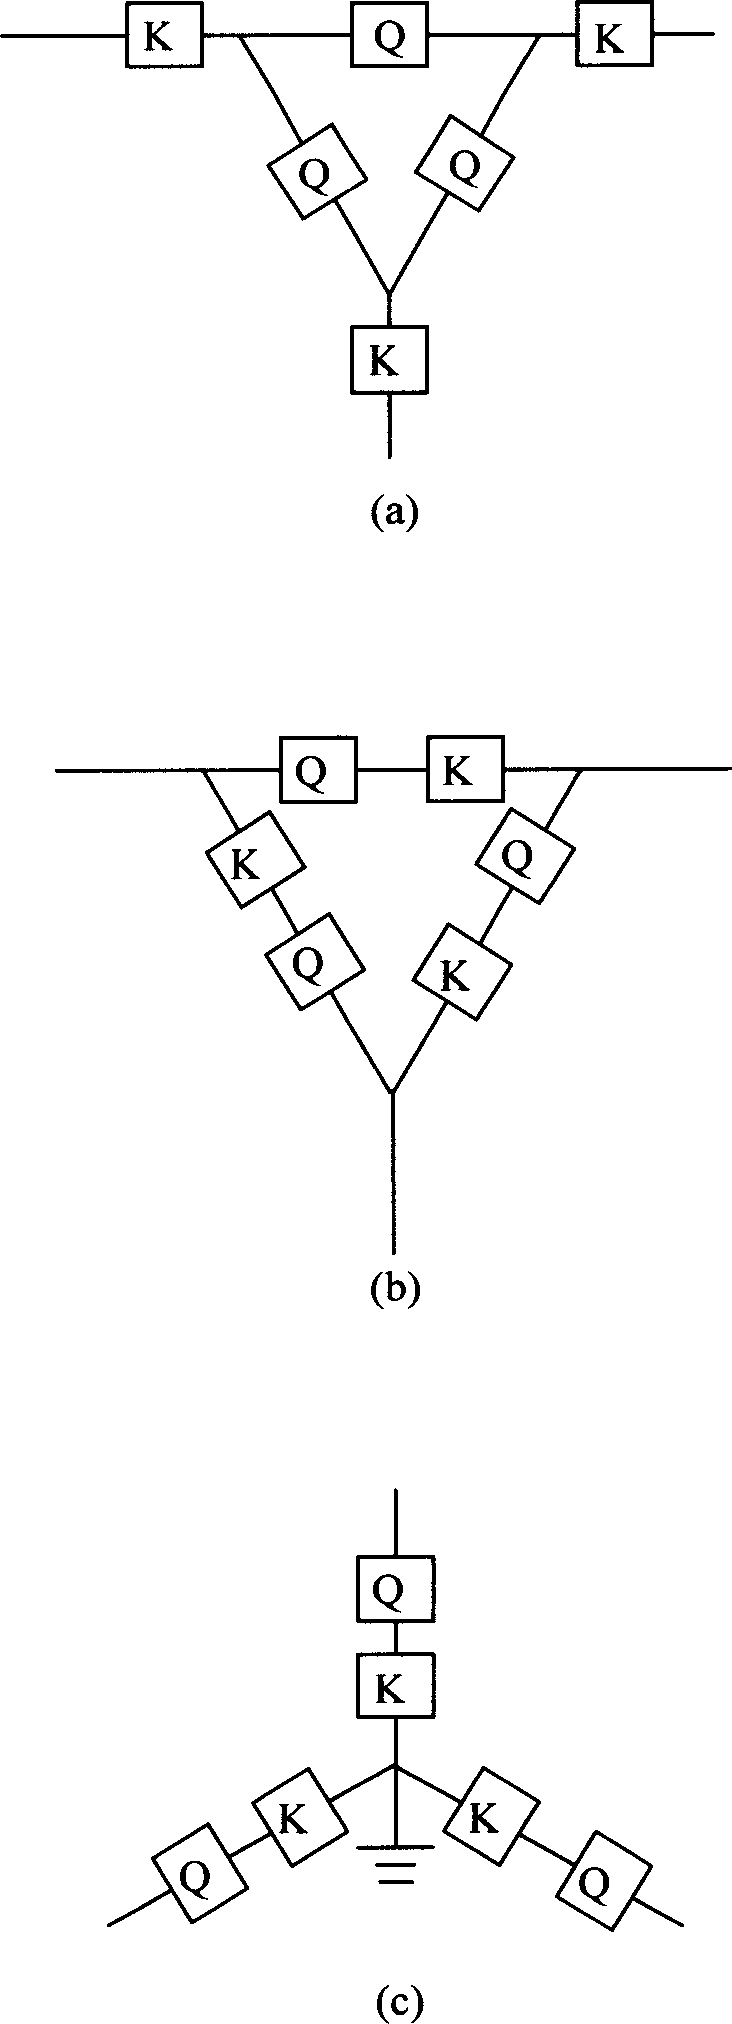 Apparatus for effectively compensating three-phase unbalance load and reactive power